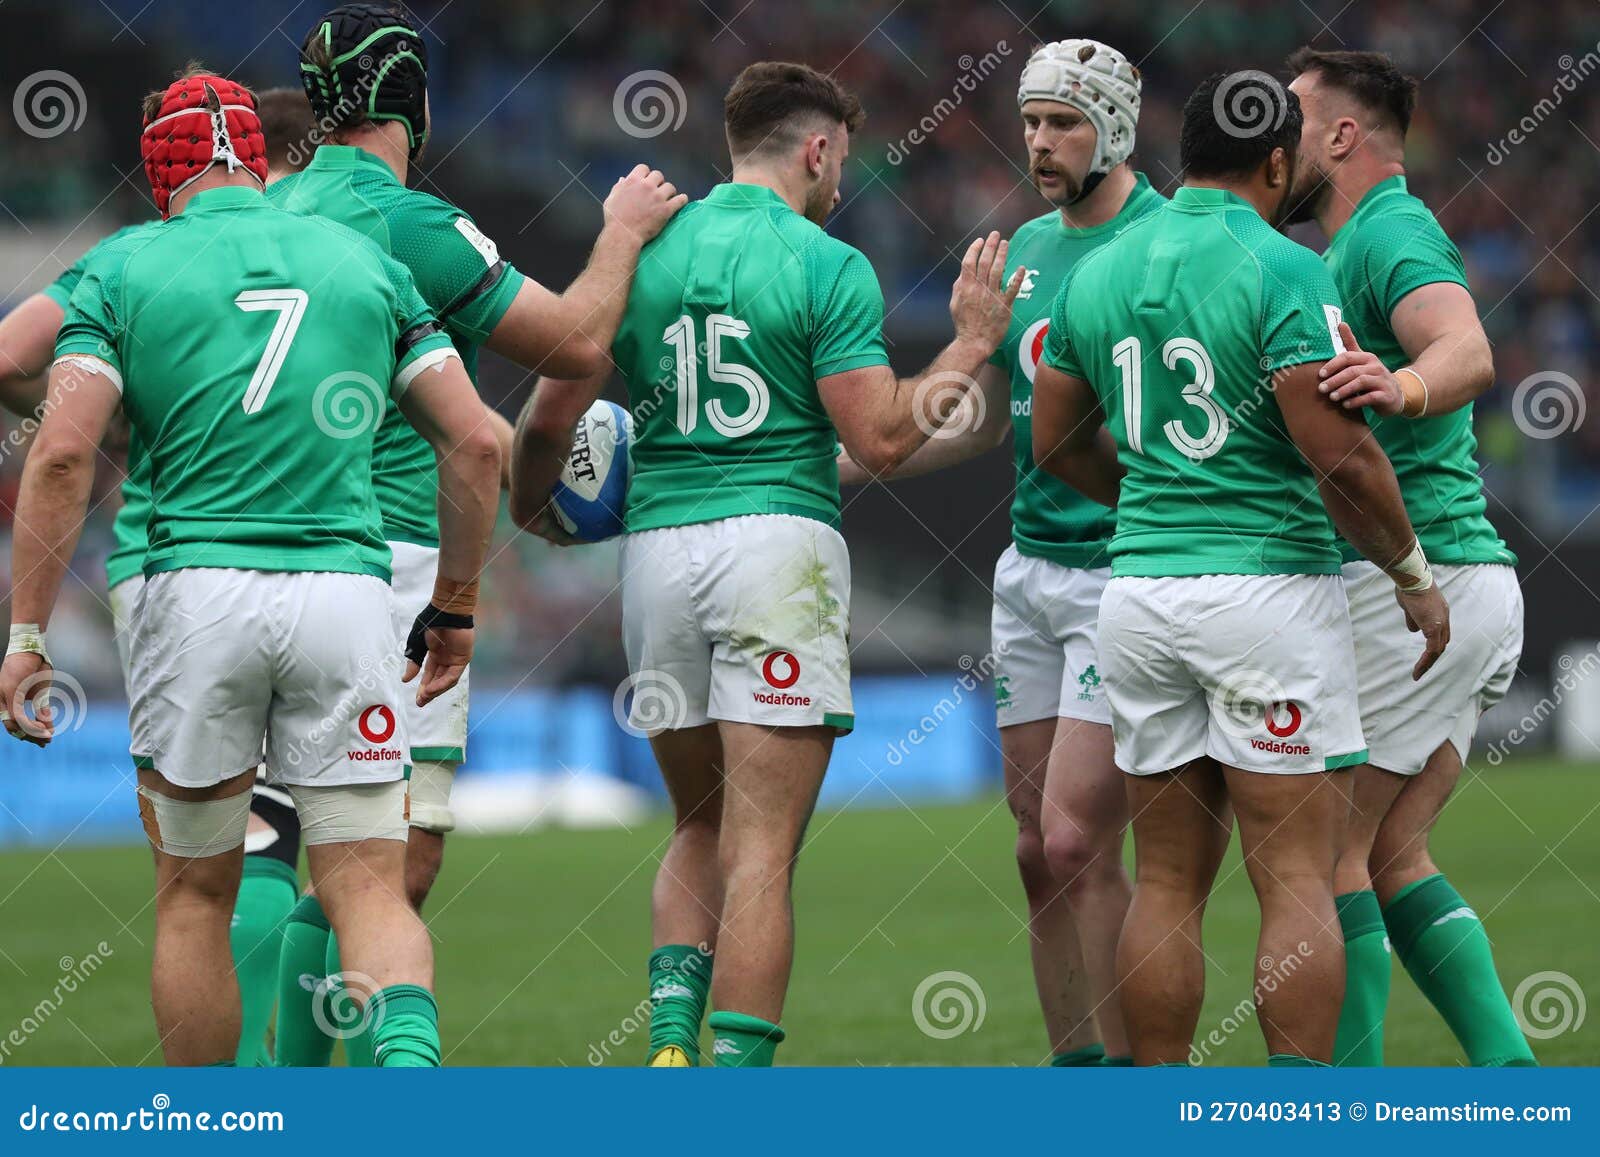 RUGBY GUINNESS SIX NATIONS 2023 - ITALY Vs IRELAND at OLYMPIC STADIUM in ROME Editorial Stock Photo